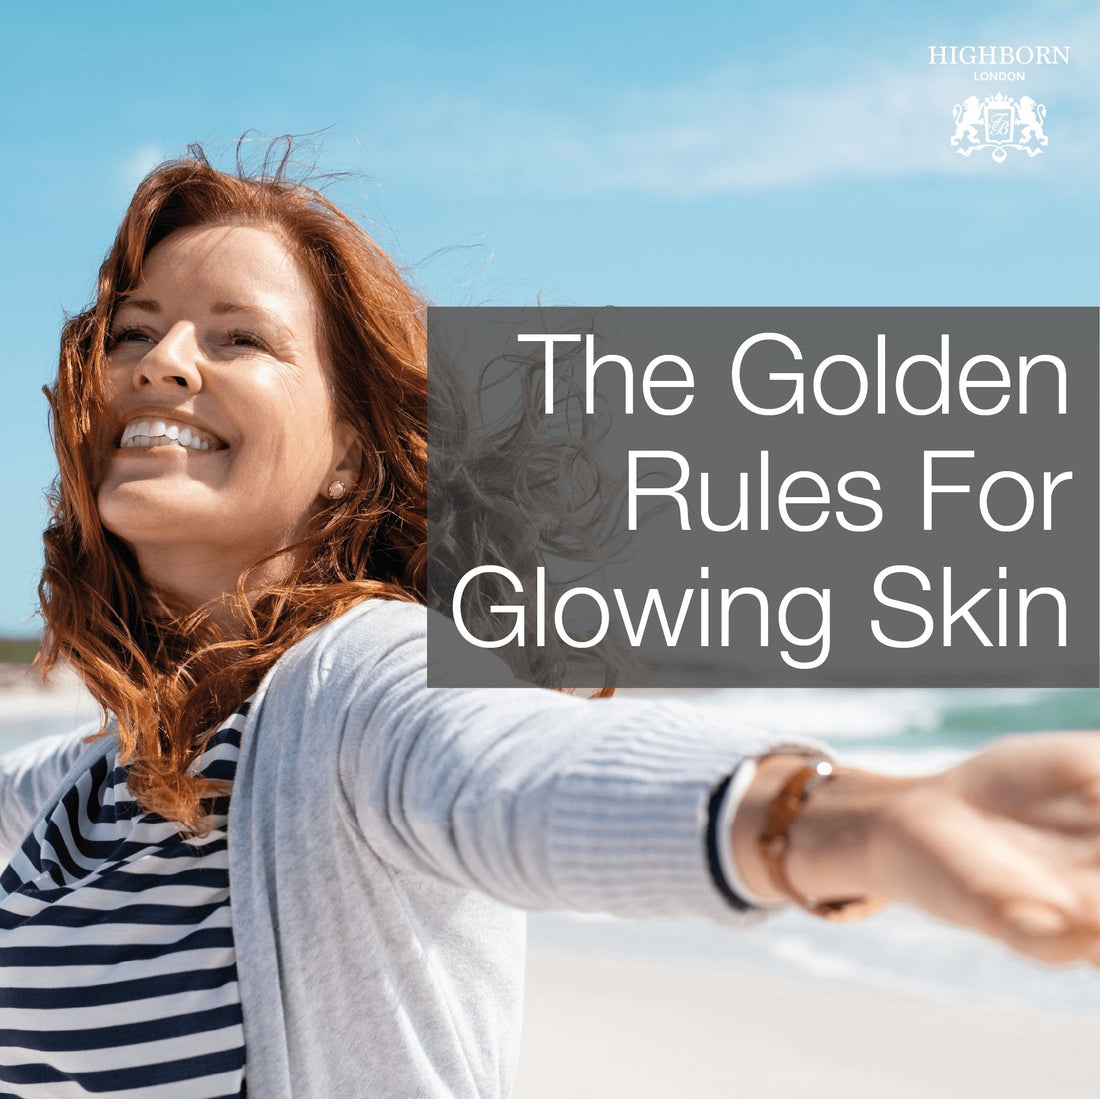 5 Golden Rules For Gorgeous, Glowing Skin - HighBorn London